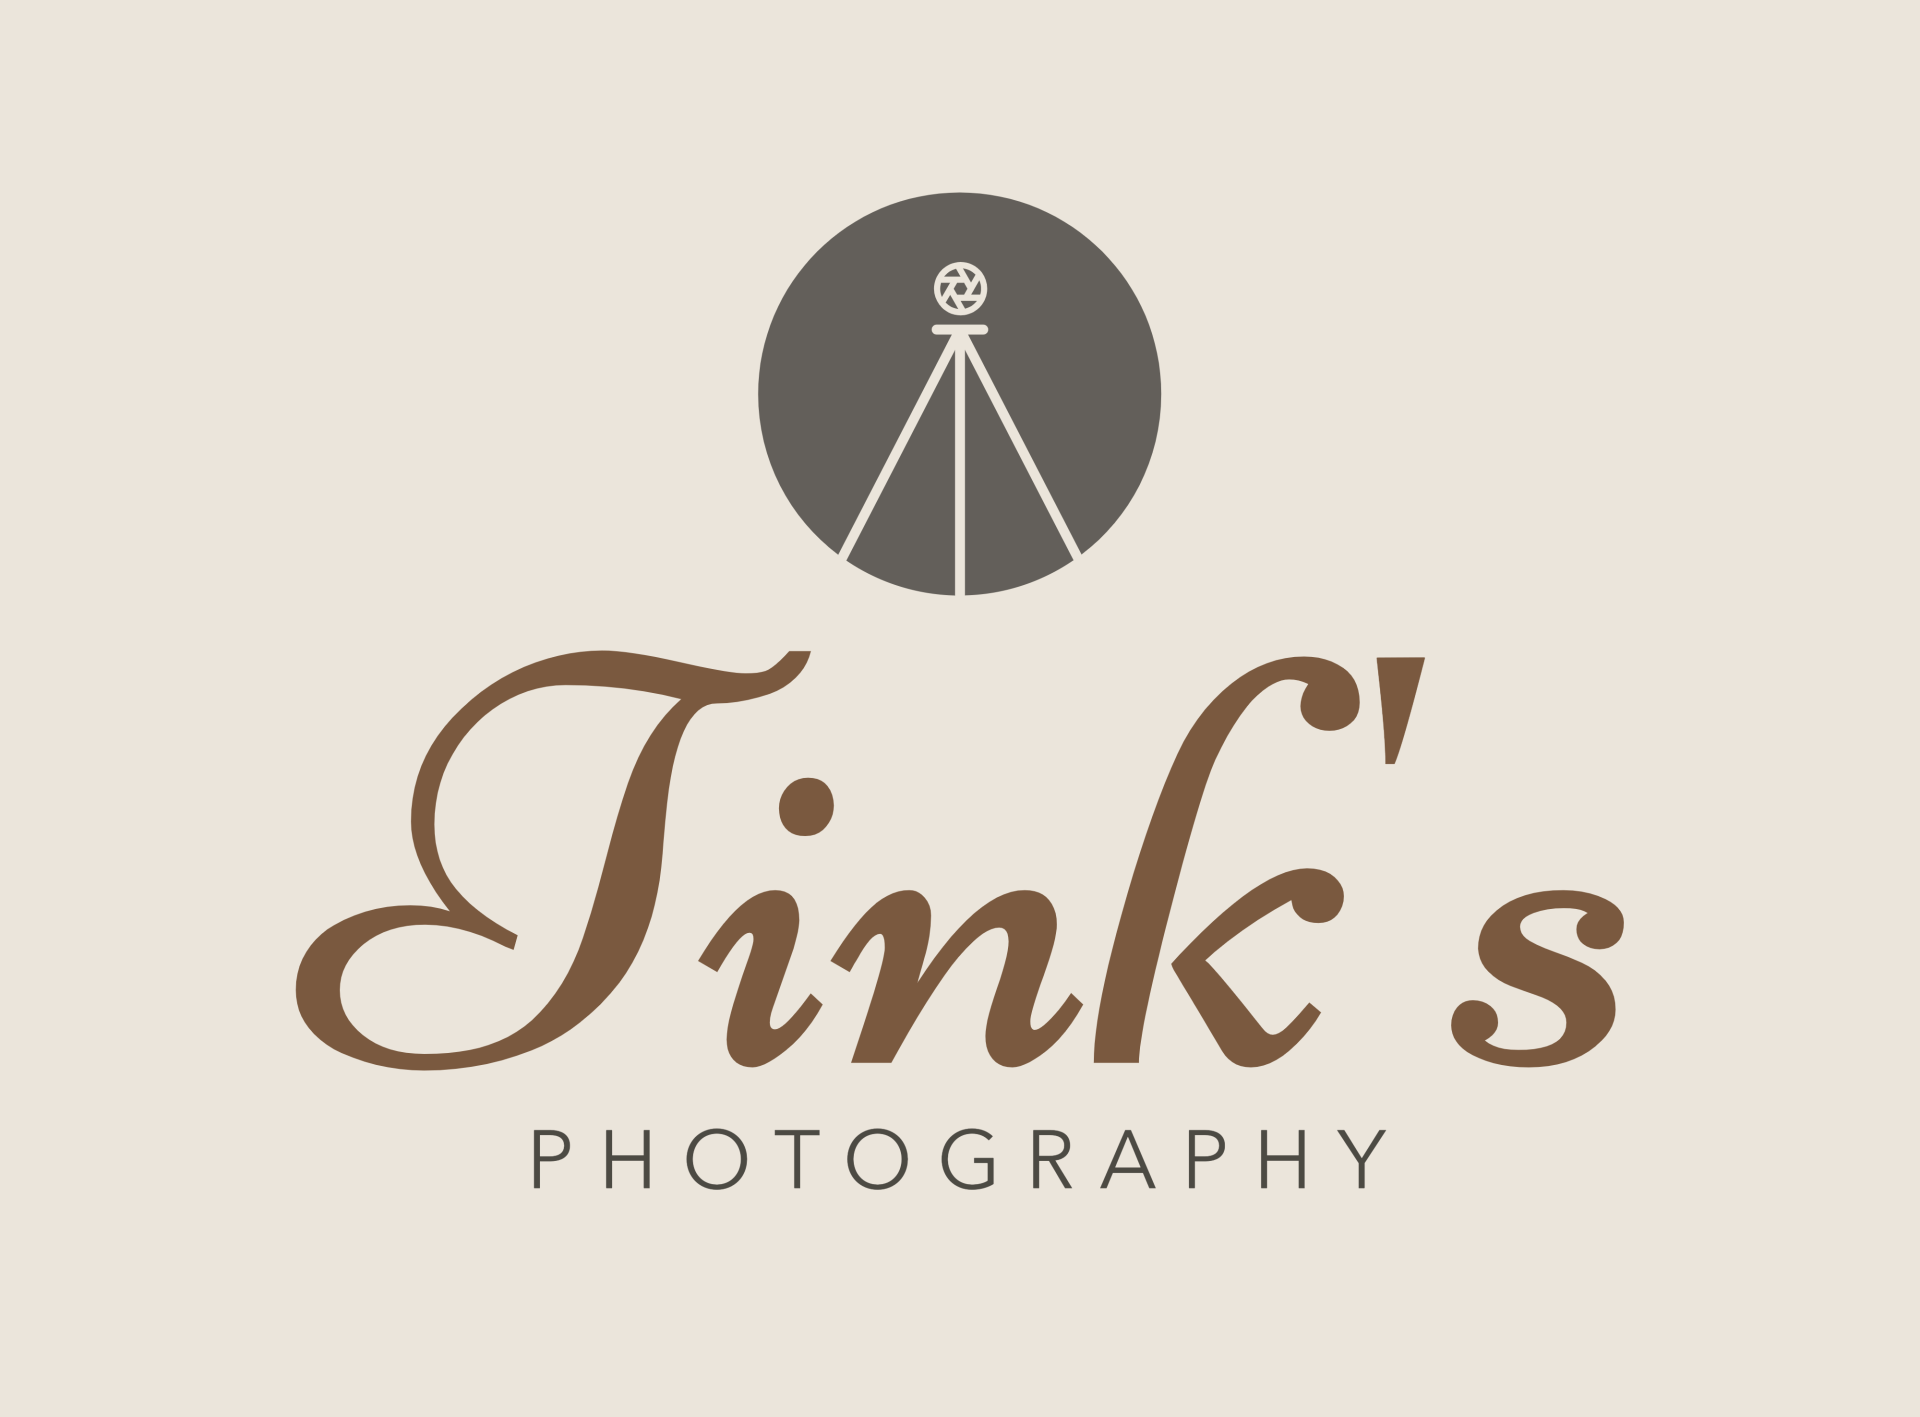 Tink's Photography, Johnstown PA, featured business of the Lorain/Stonycreek hiking trails